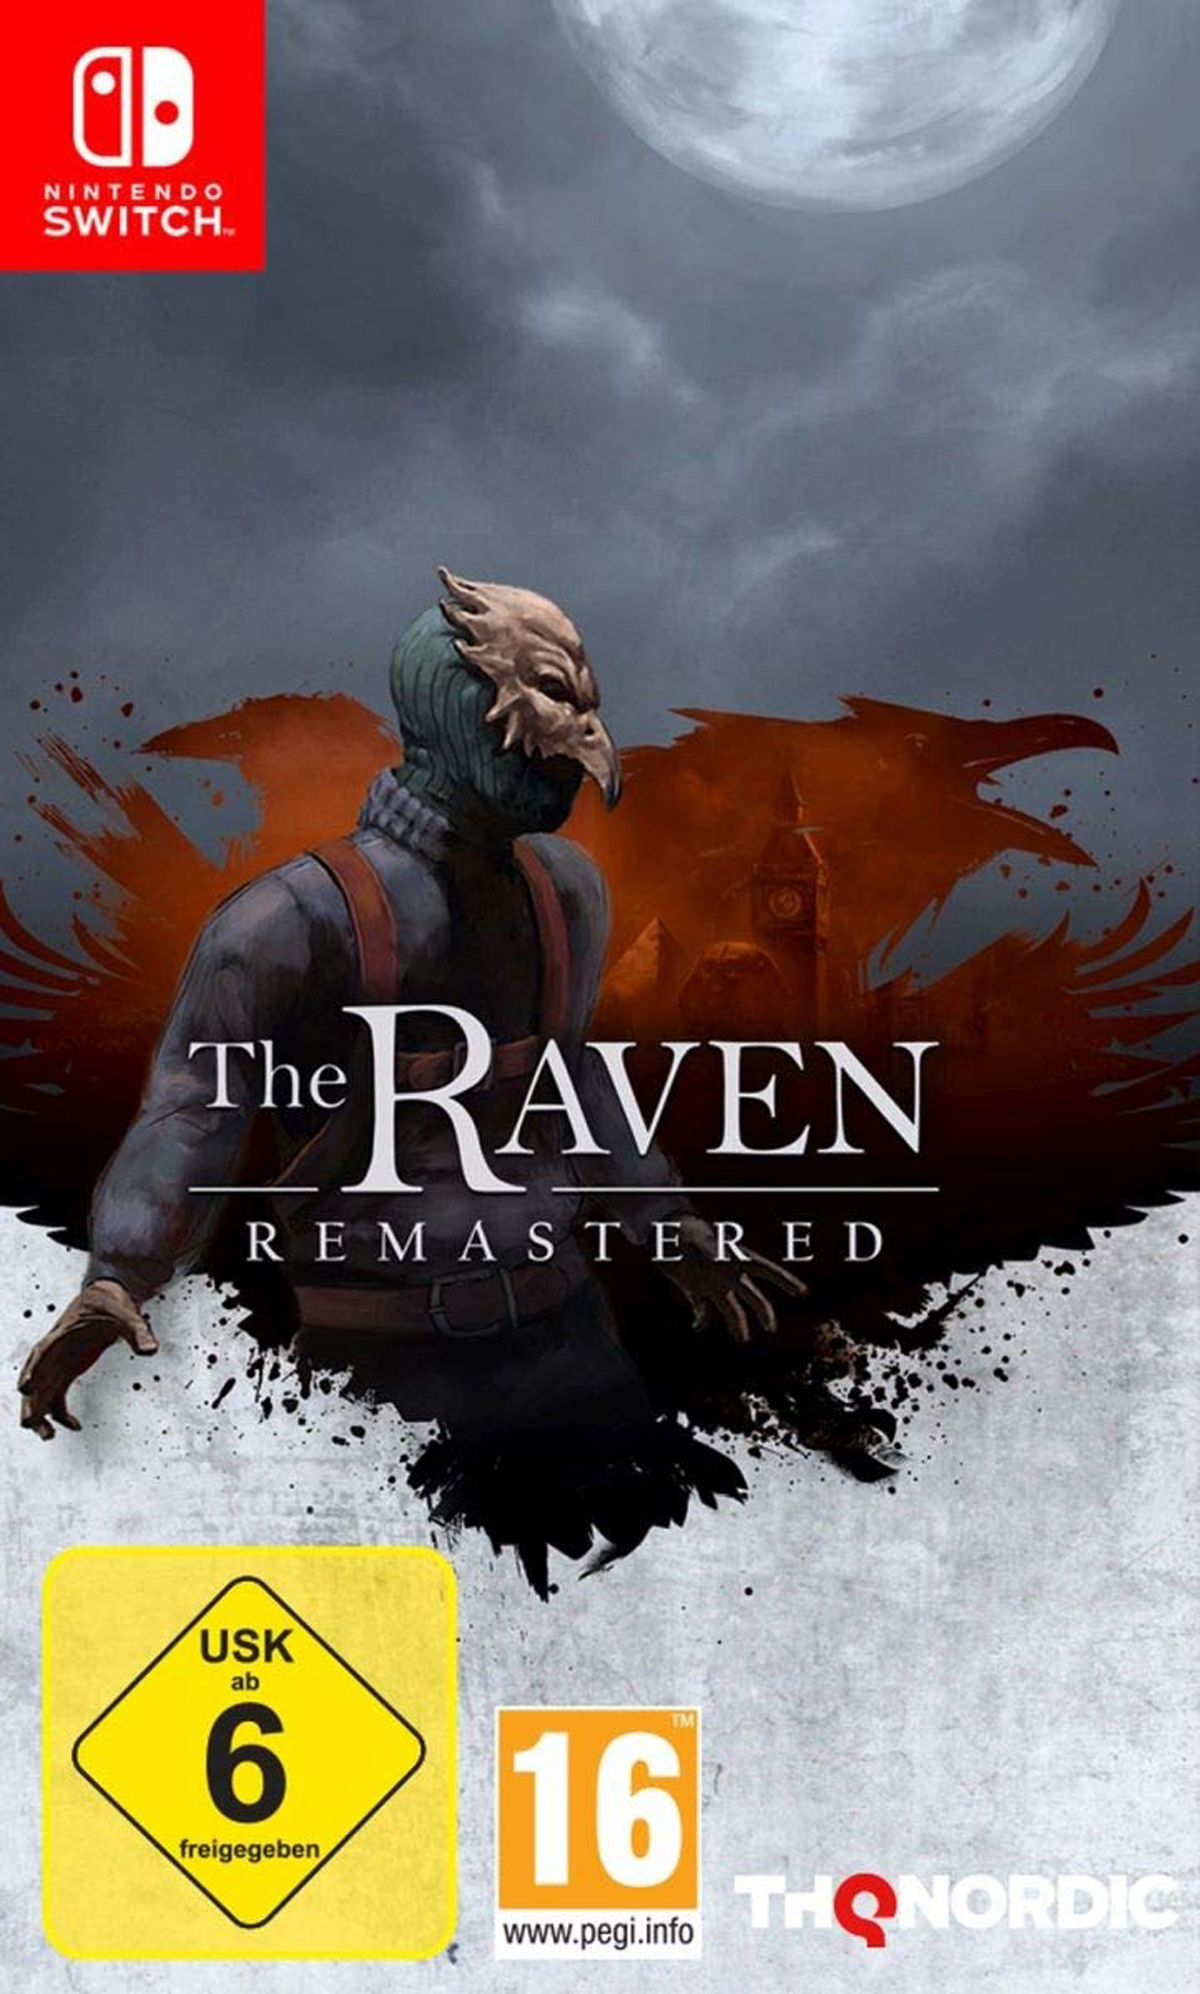 Remastered Raven - The Switch] - [Nintendo